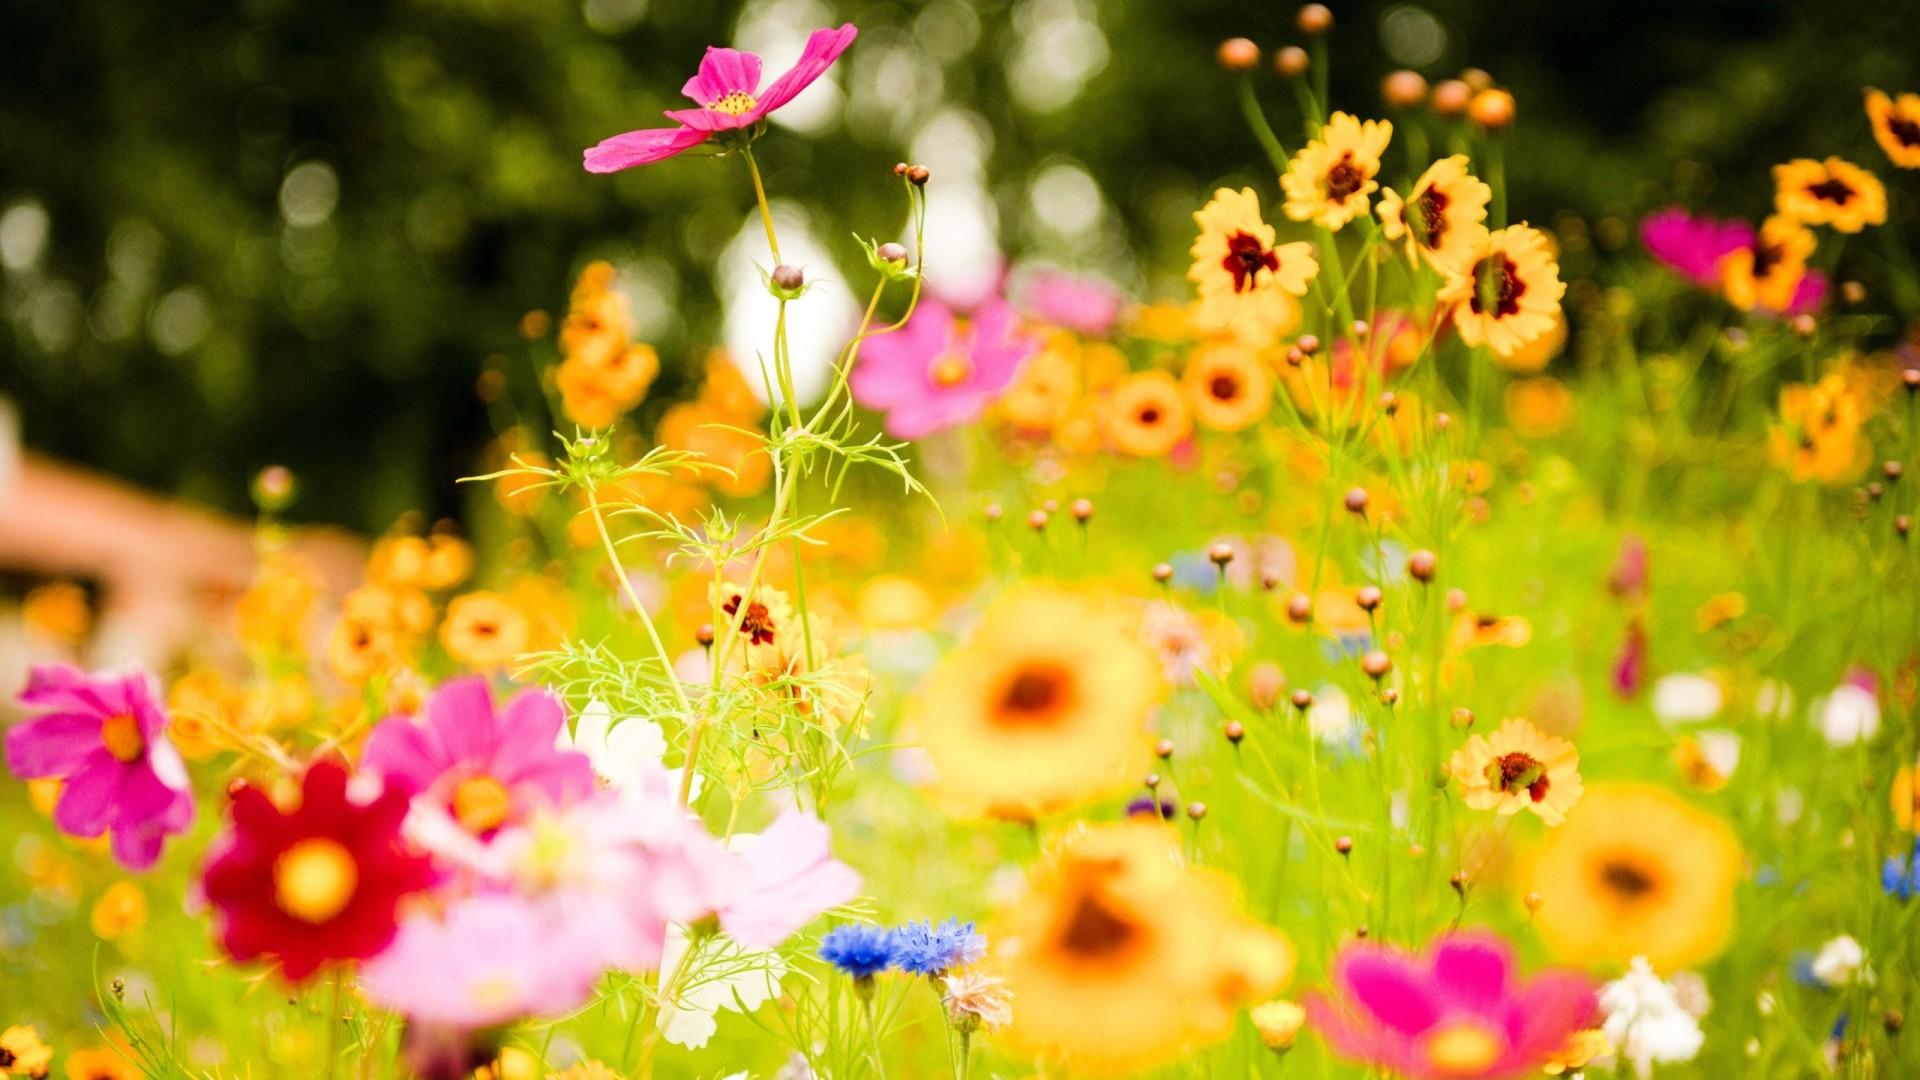 Colorful flowers photography wallpaper | (42098)